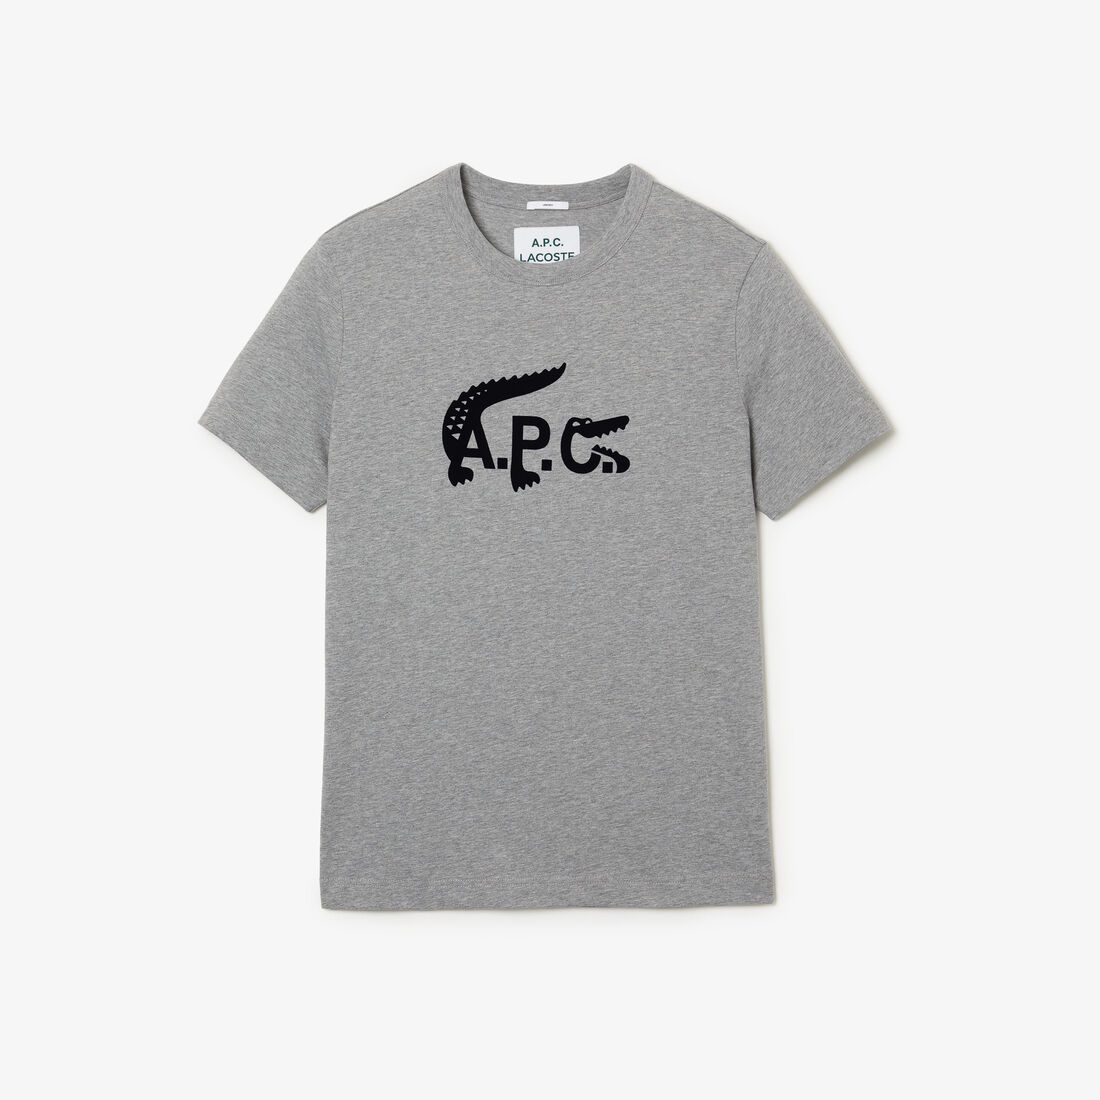 Lacoste X A.p.c. Jersey T-shirts Herren Mehrfarbig | KEQP-79341